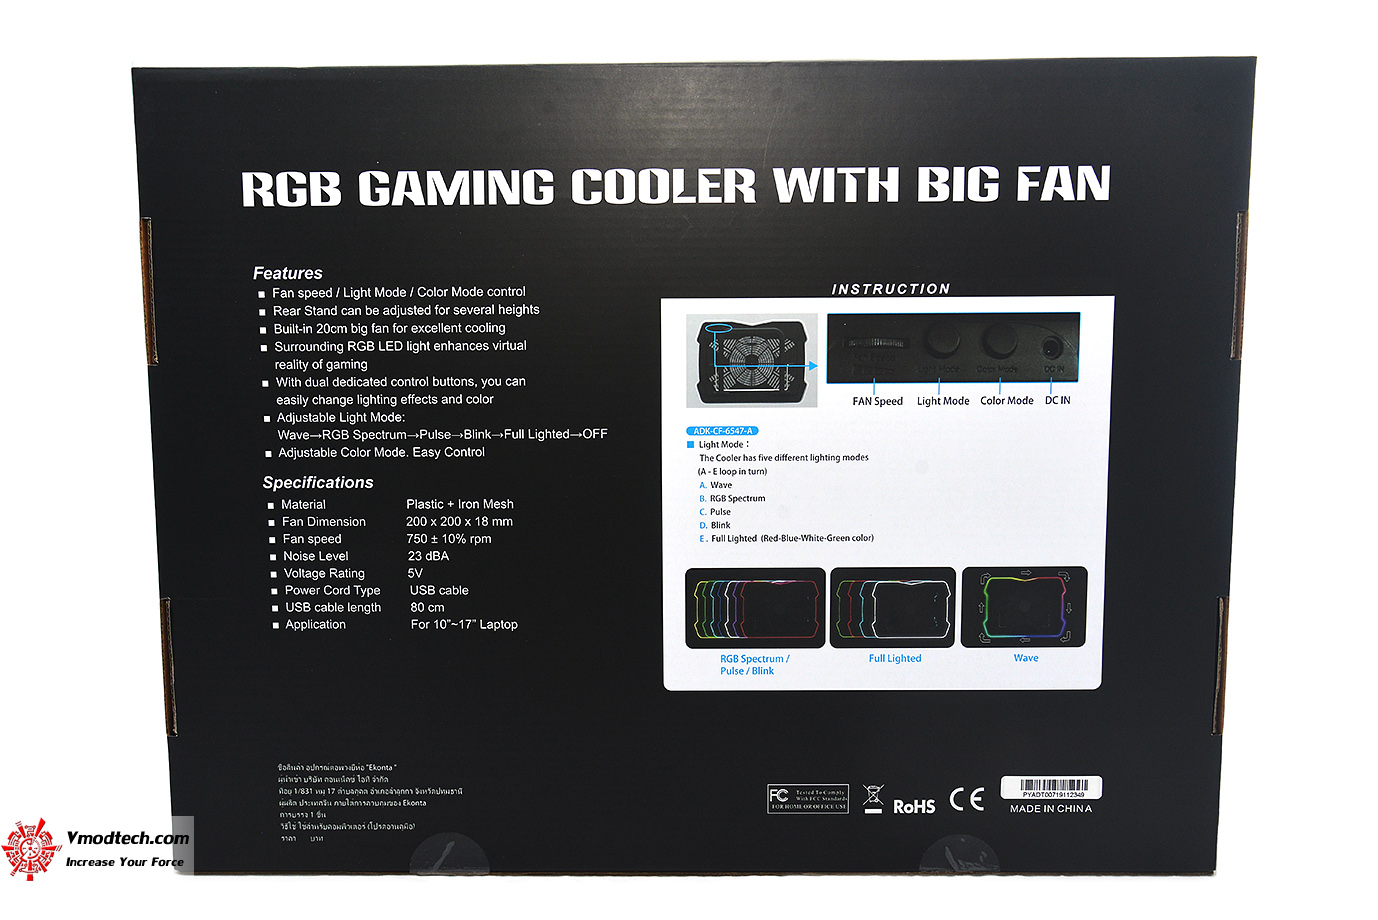 dsc 5756 EKONTA RGB GAMING COOLING WITH BIG FAN REVIEW